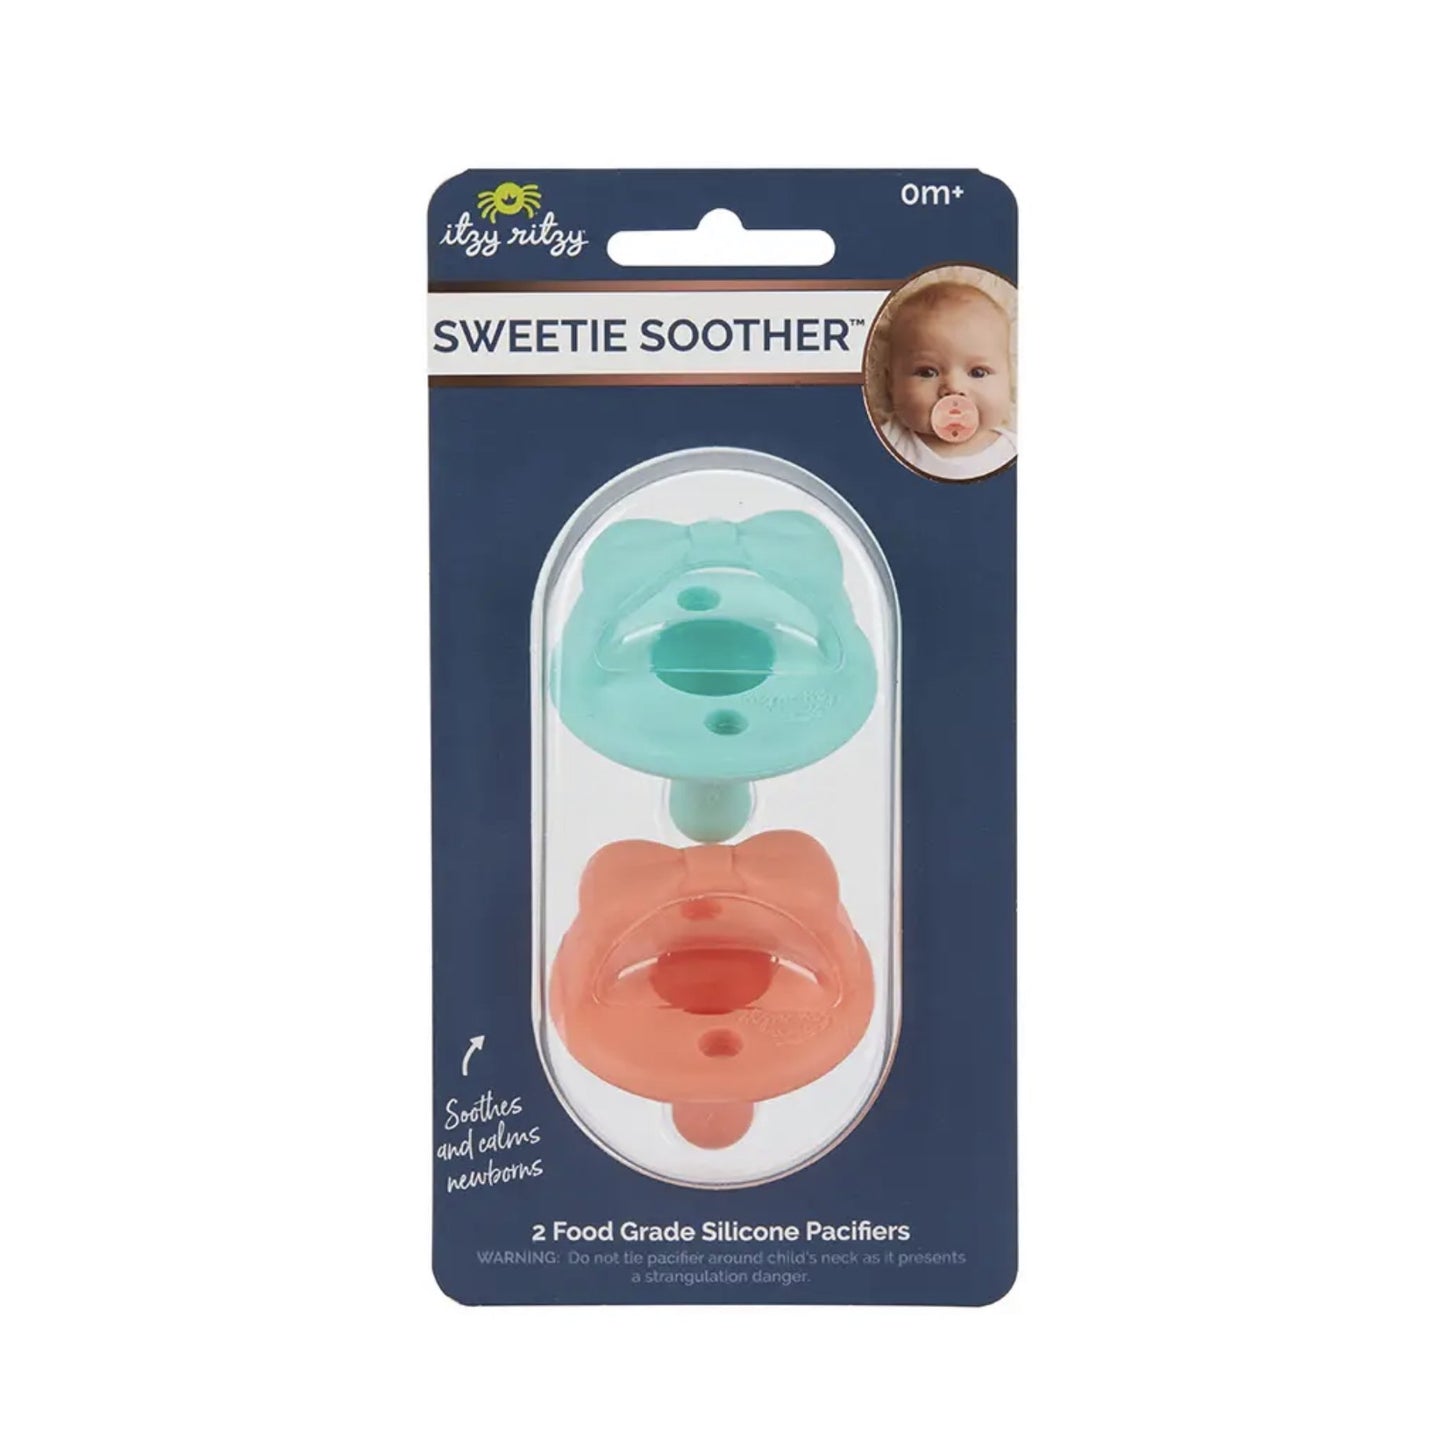 SWEETIE SOOTHER - PACIFIER 2-PACK Baby in Styles